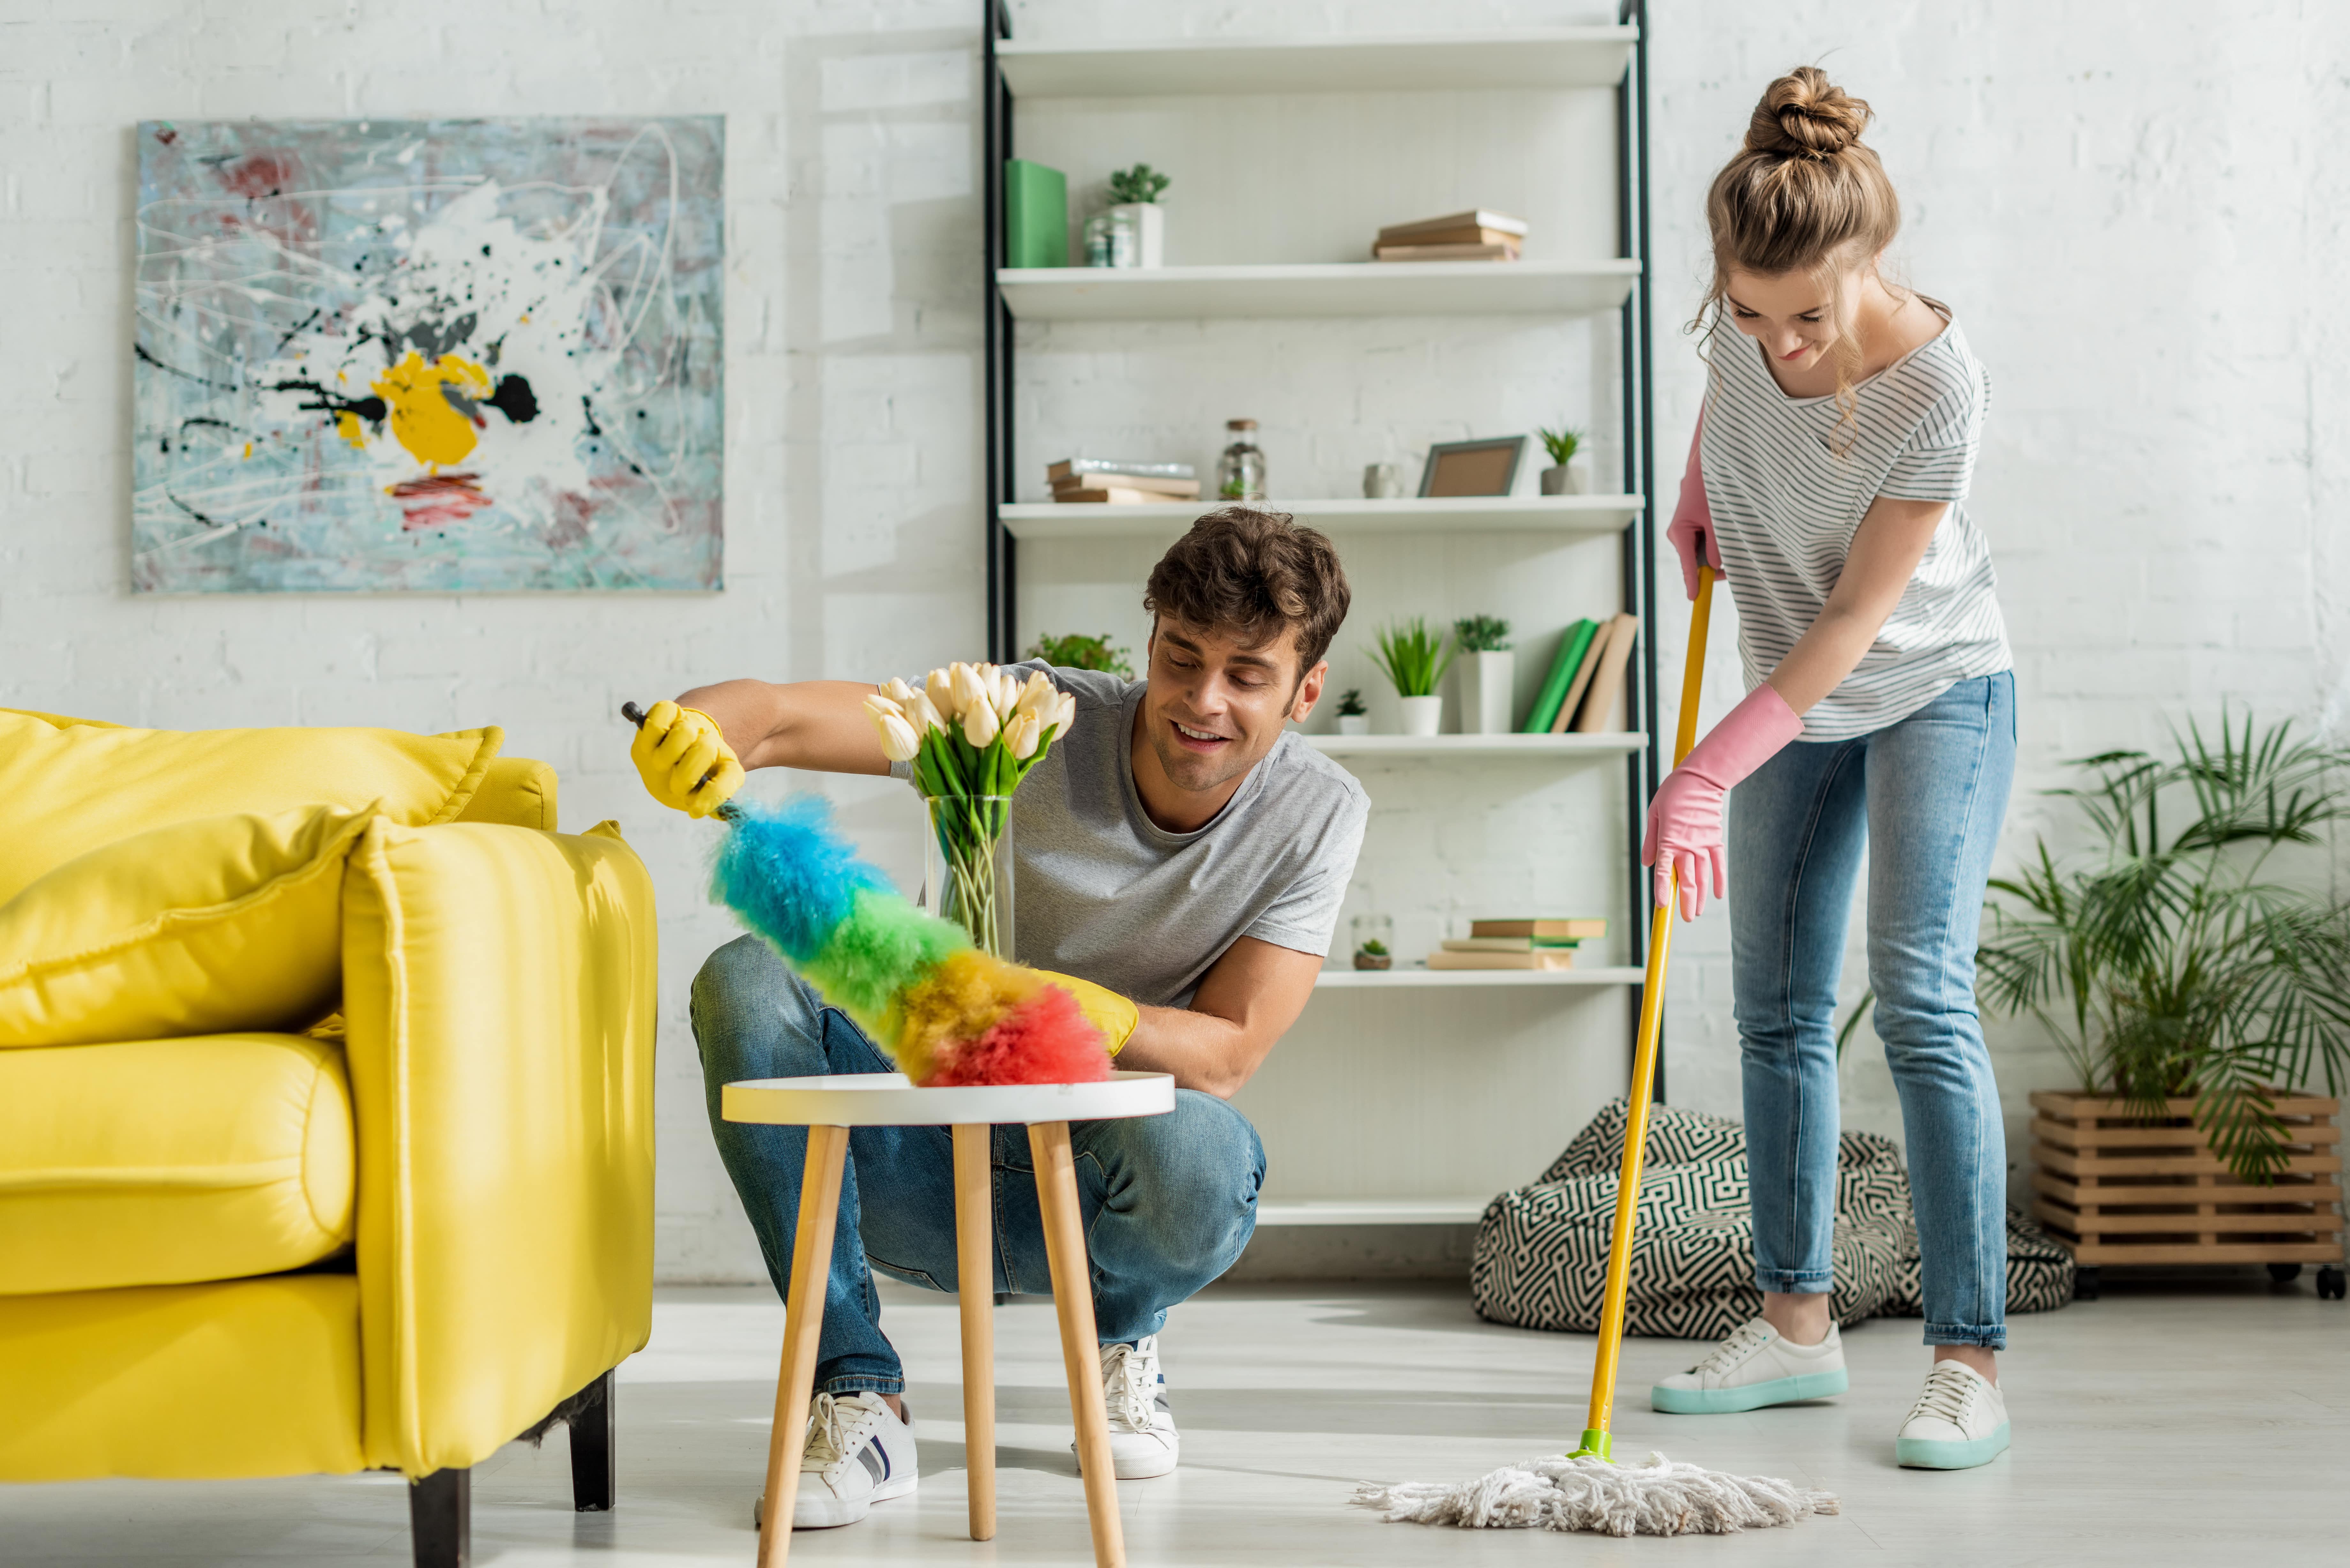 A couple working together to spring clean their home. A woman wearing pink cleaning gloves is mopping the floor while a man carefully uses a multicoloured dusting tool to remove dust for a side table.